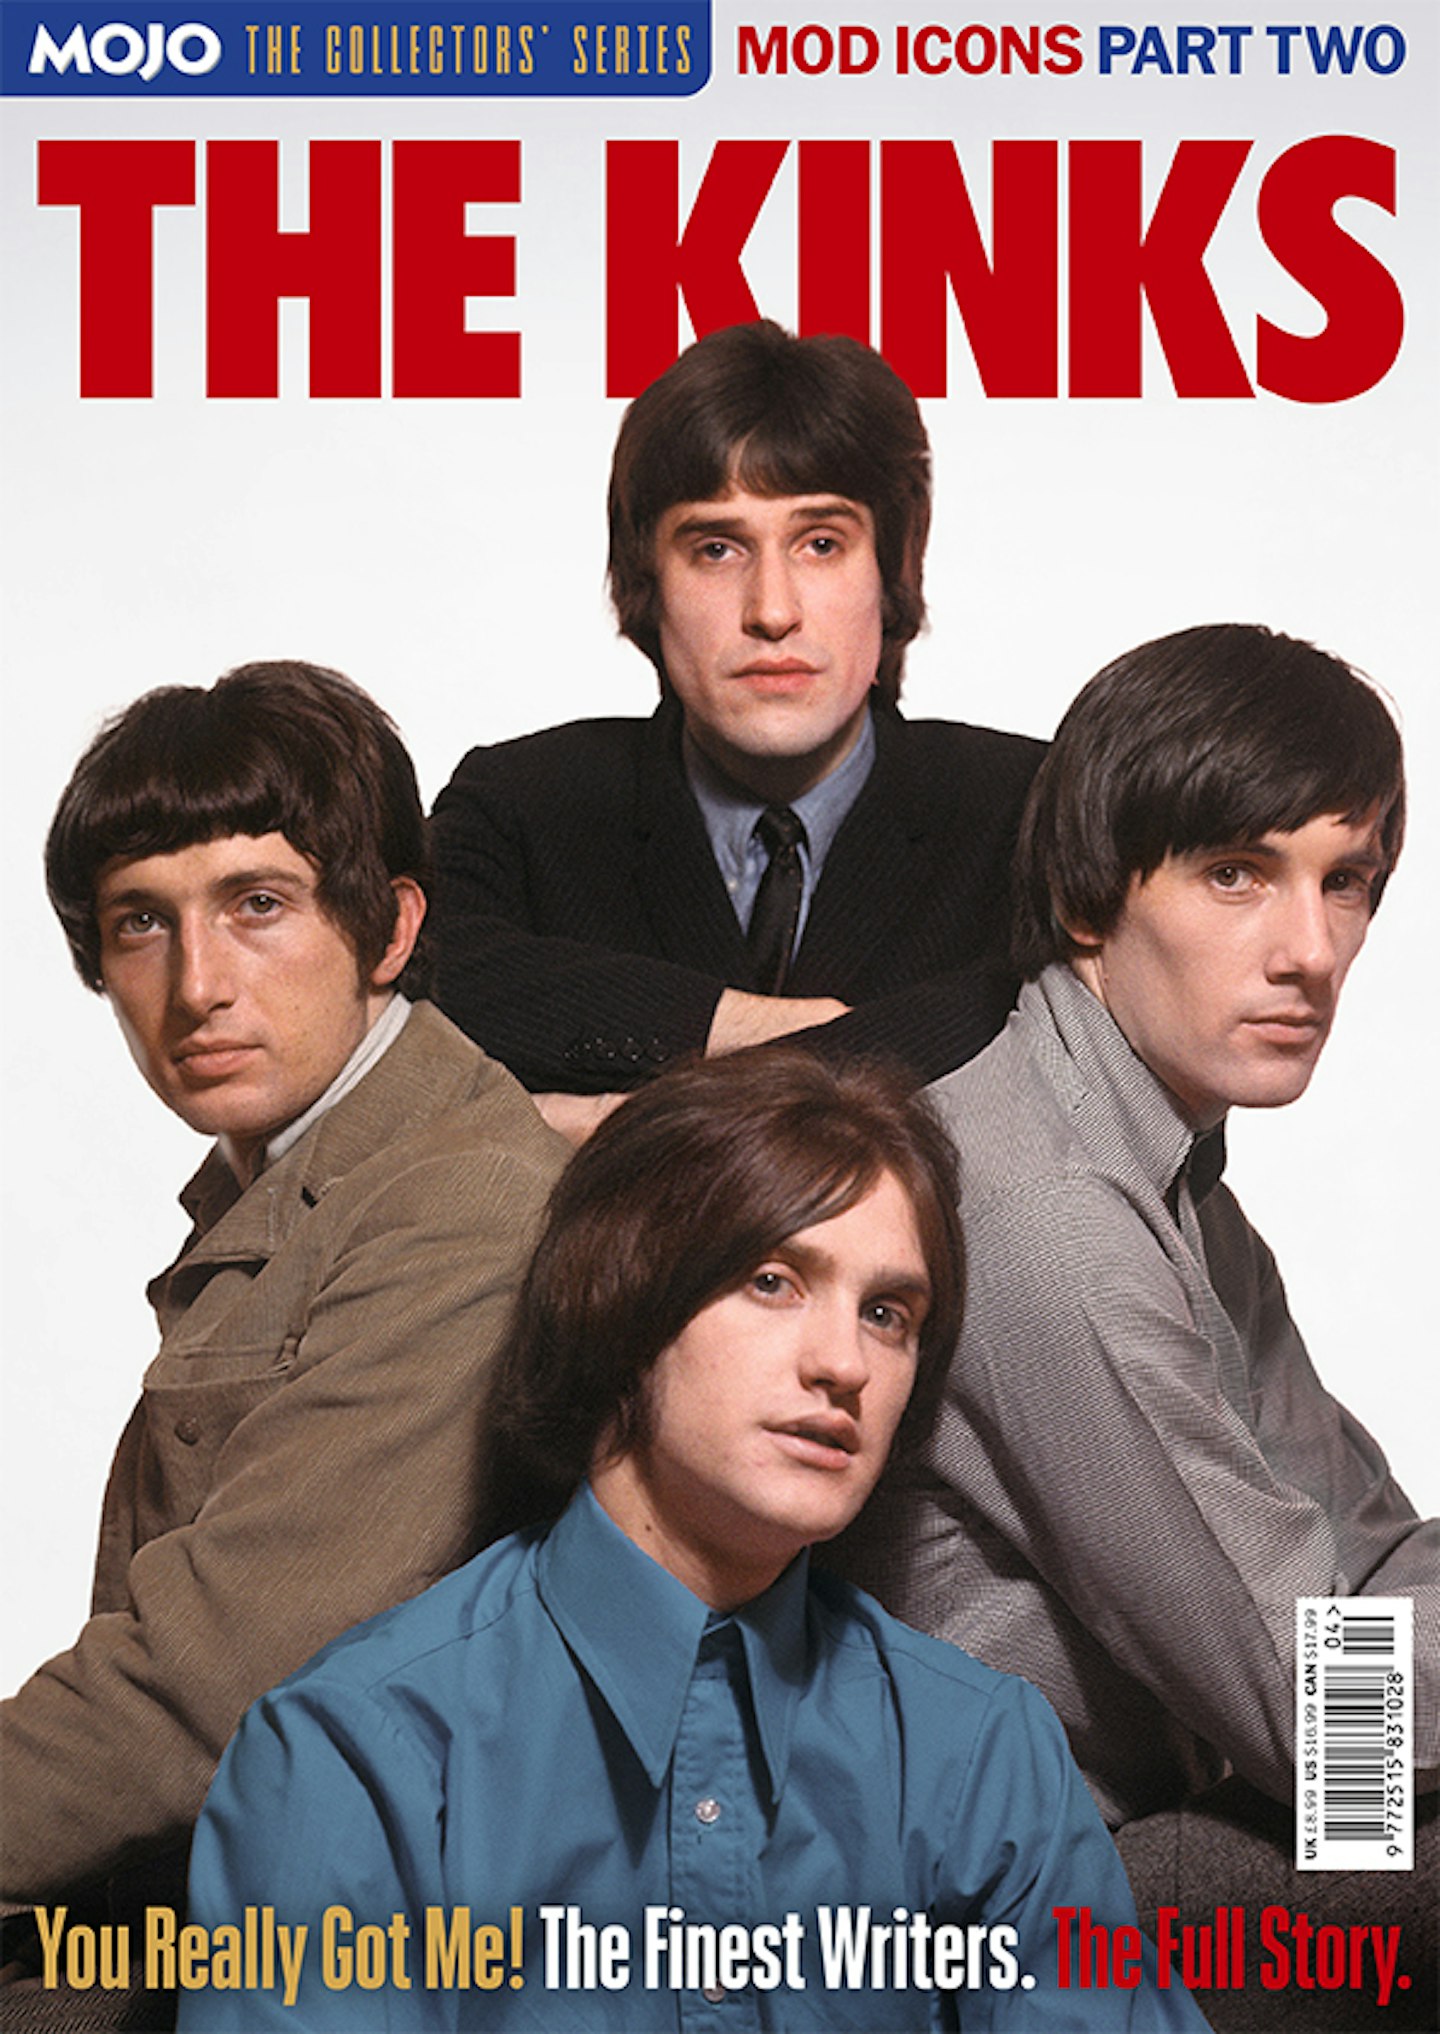 Introducing the latest MOJO Collectors’ Series edition, on The Kinks